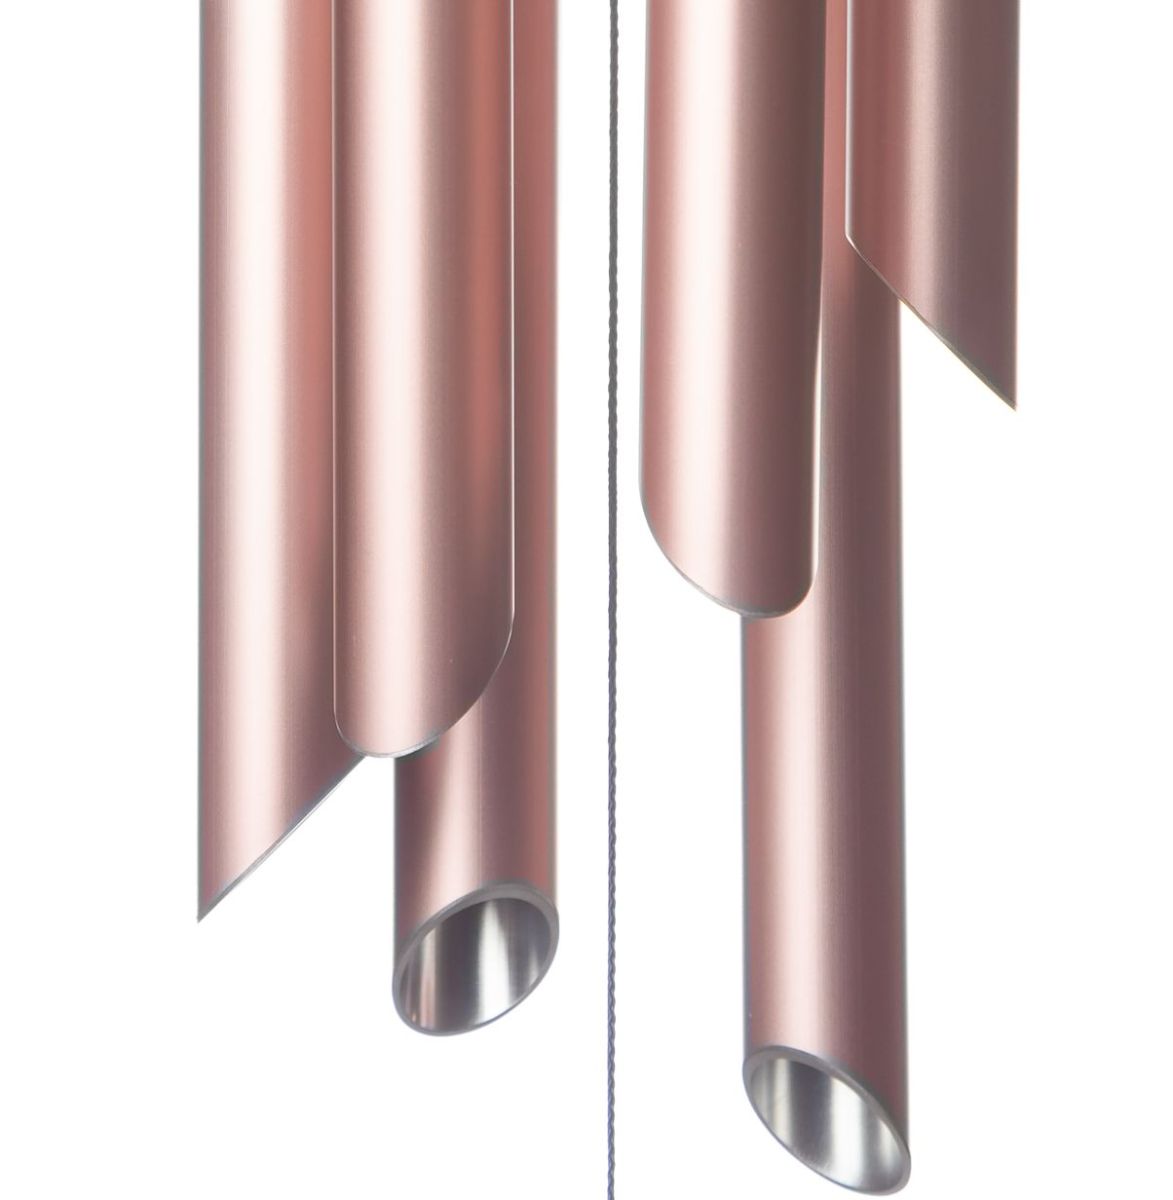 Pink wind chime for 5th wedding anniversary gift